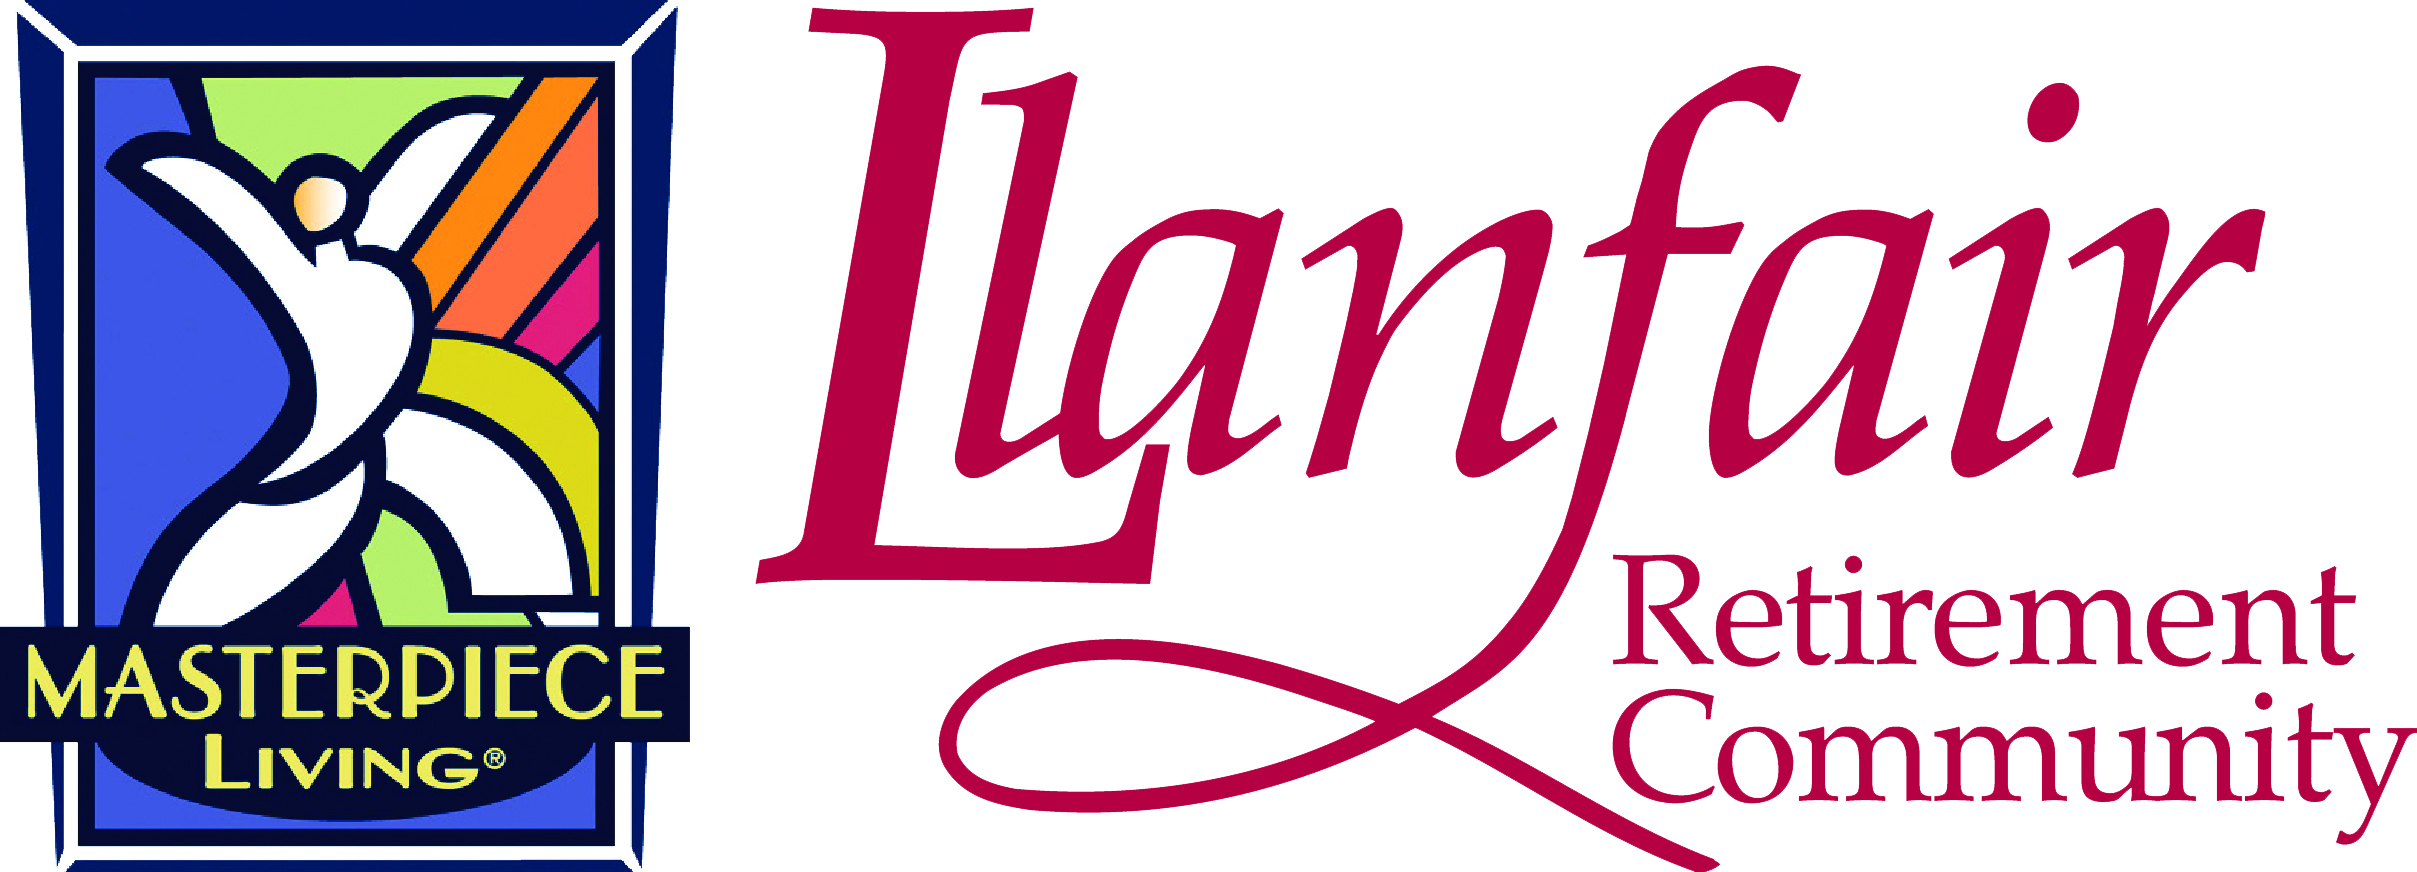 Llanfair is a Masterpiece Living community - where aging is a vibrant, inspired process.